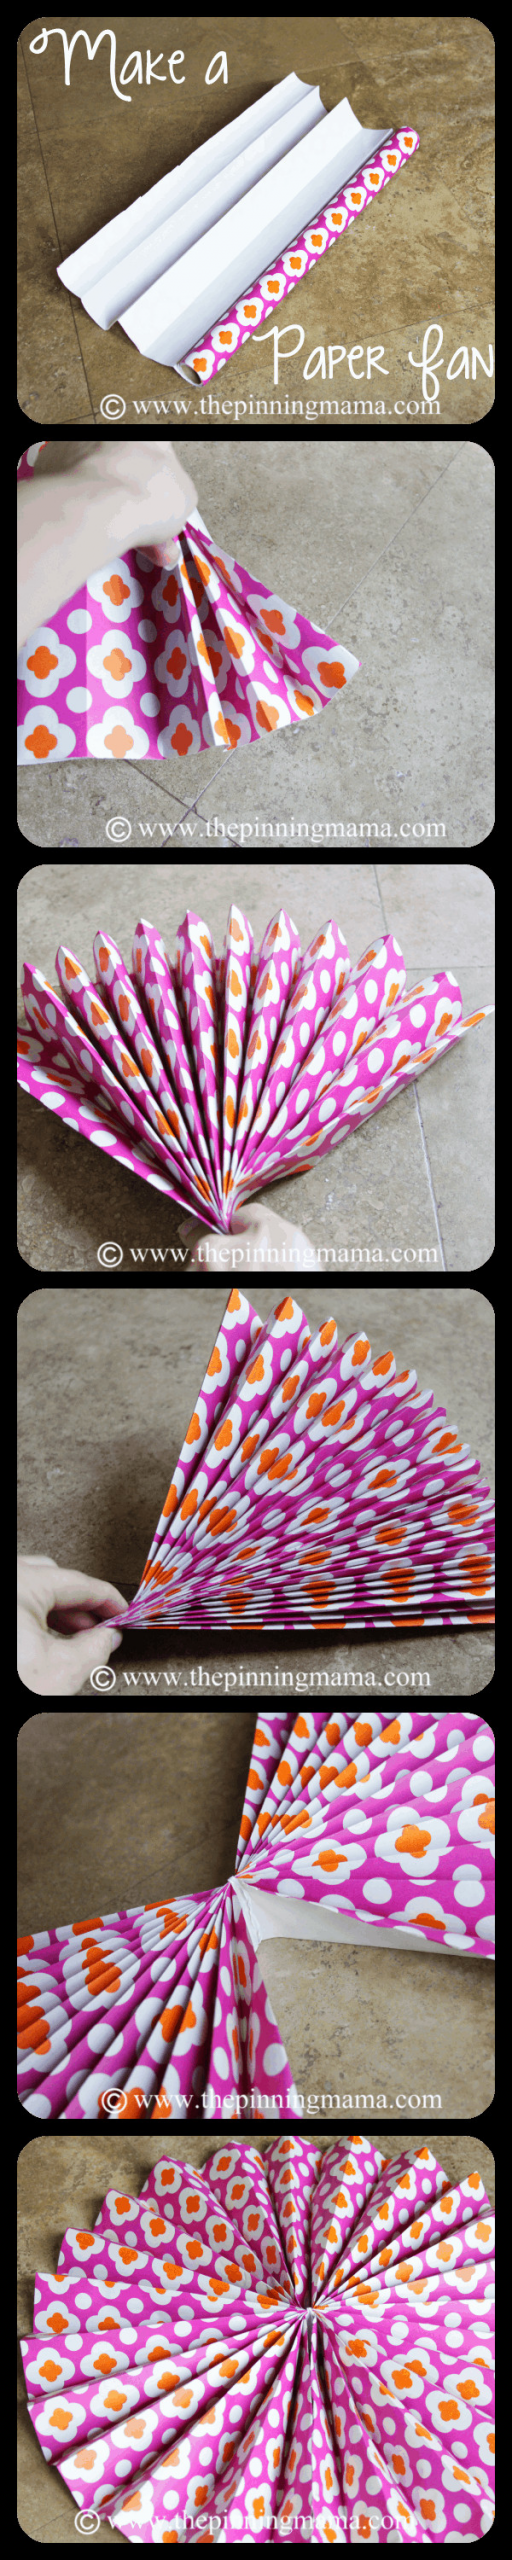 Paper Fan Decorations DIY
 DIY Paper Fan Party Decoration The Pinning Mama